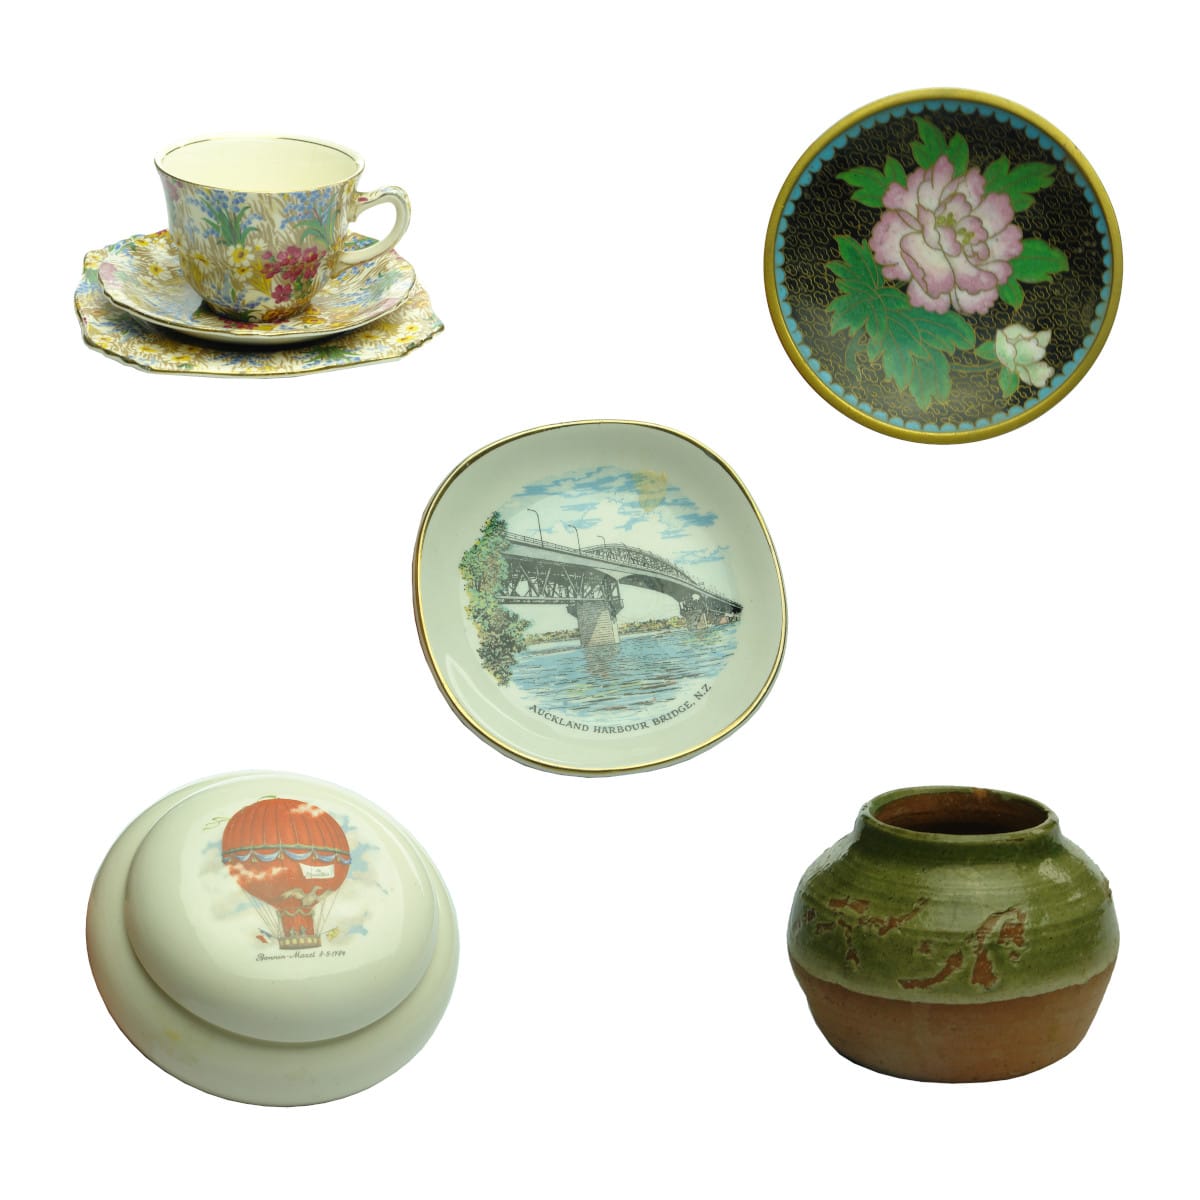 Five items or groups: Royal Winton Marguerite Trio; Chinese Brass plate with enamel decoration; Auckland Harbour plate; Hot Air Balloon ceramic jar and lid; Small pot, Kilgour or similar on base.